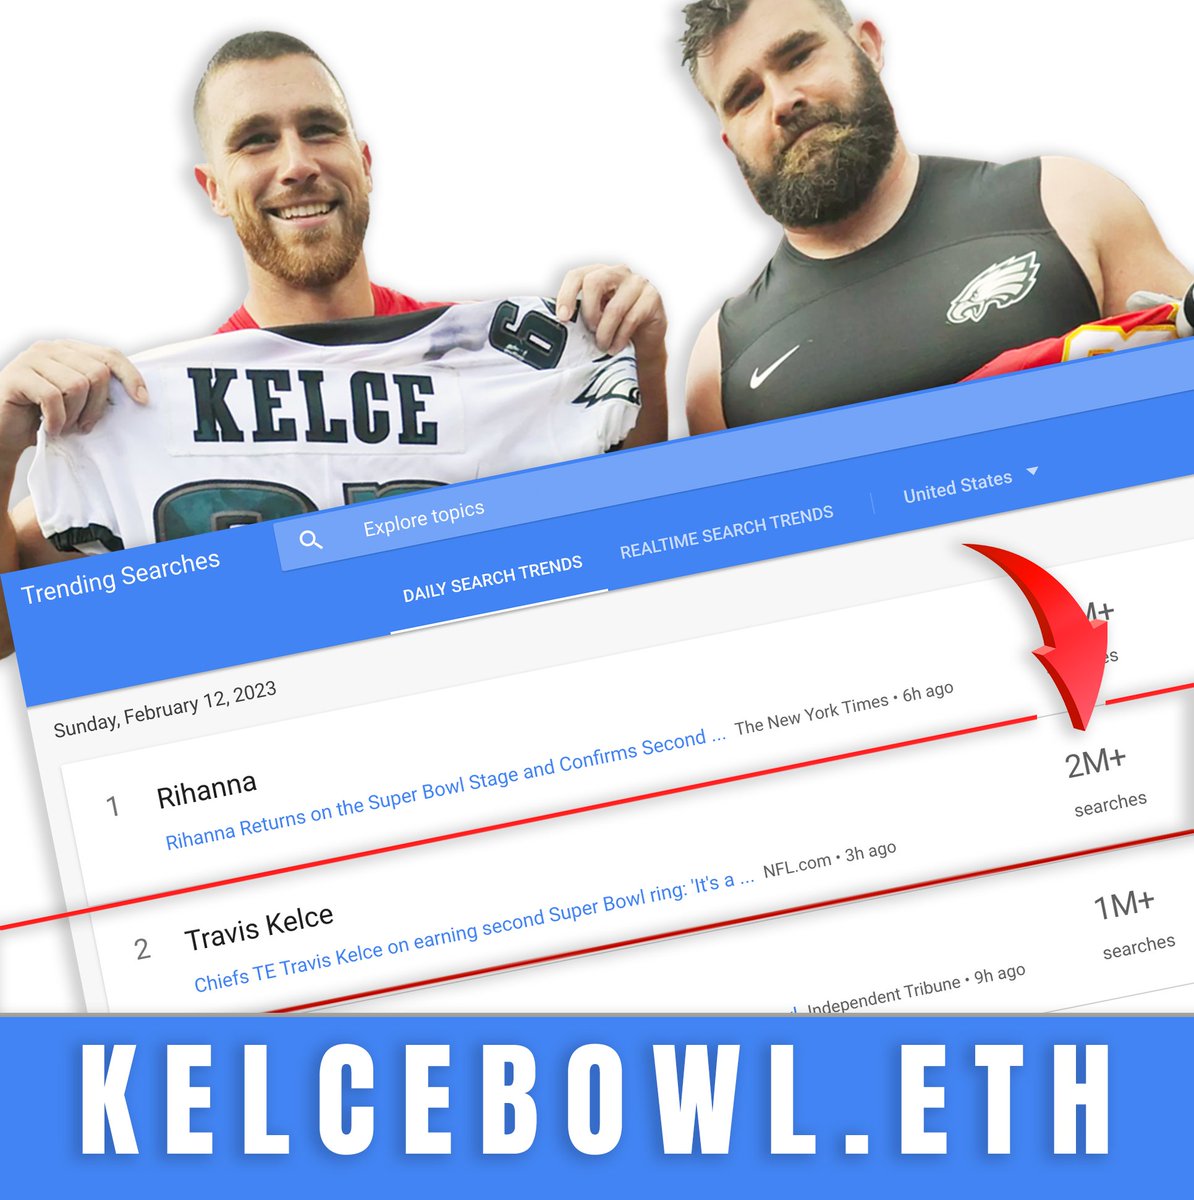 Kansas City Chiefs are world champions  🔥🏈

2 Hours left to own: kelcebowl.eth
Click here: swiy.co/kelcebowl

#KelceBowl #SuperBowlLVII #SuperBowl2023 #SuperBowlAds #ensdomains #web3 #ens #nfts #domains #TravisKelce #JasonKelce